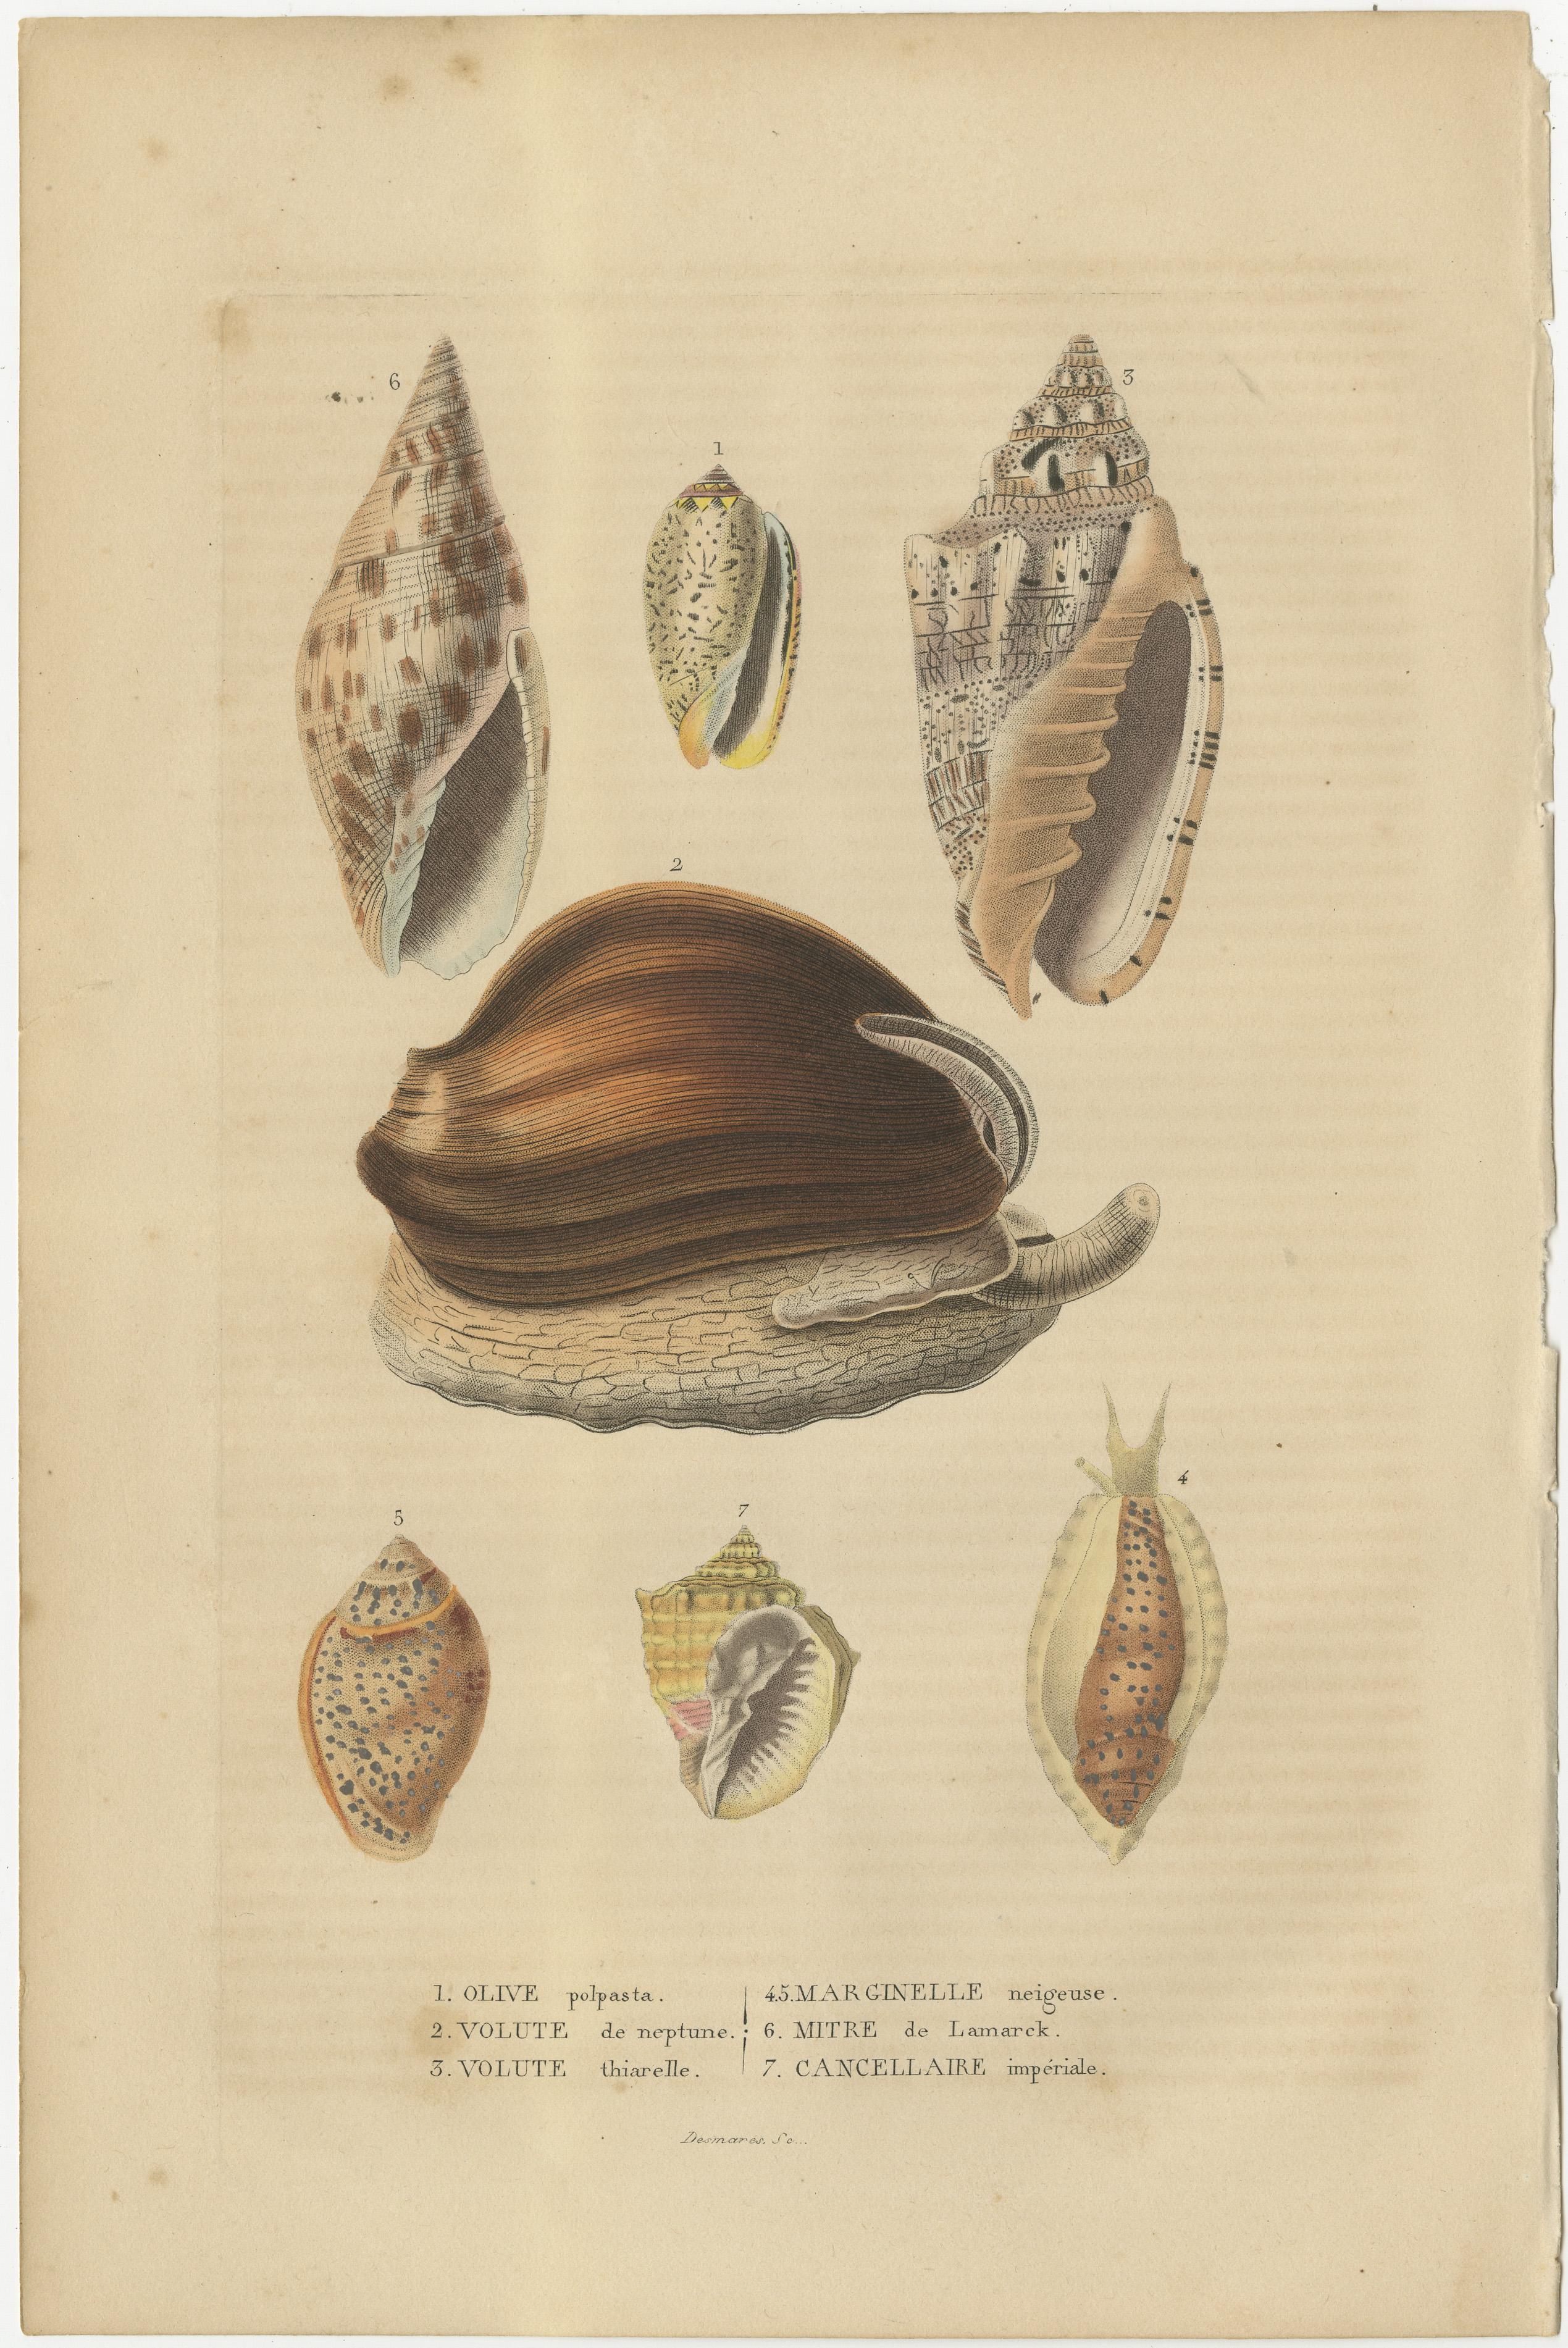 The engravings depict a variety of marine organisms, specifically mollusks, which include both gastropods and bivalves. The details for the three prints provided are as follows:

1. The first print showcases various seashells with intricate patterns